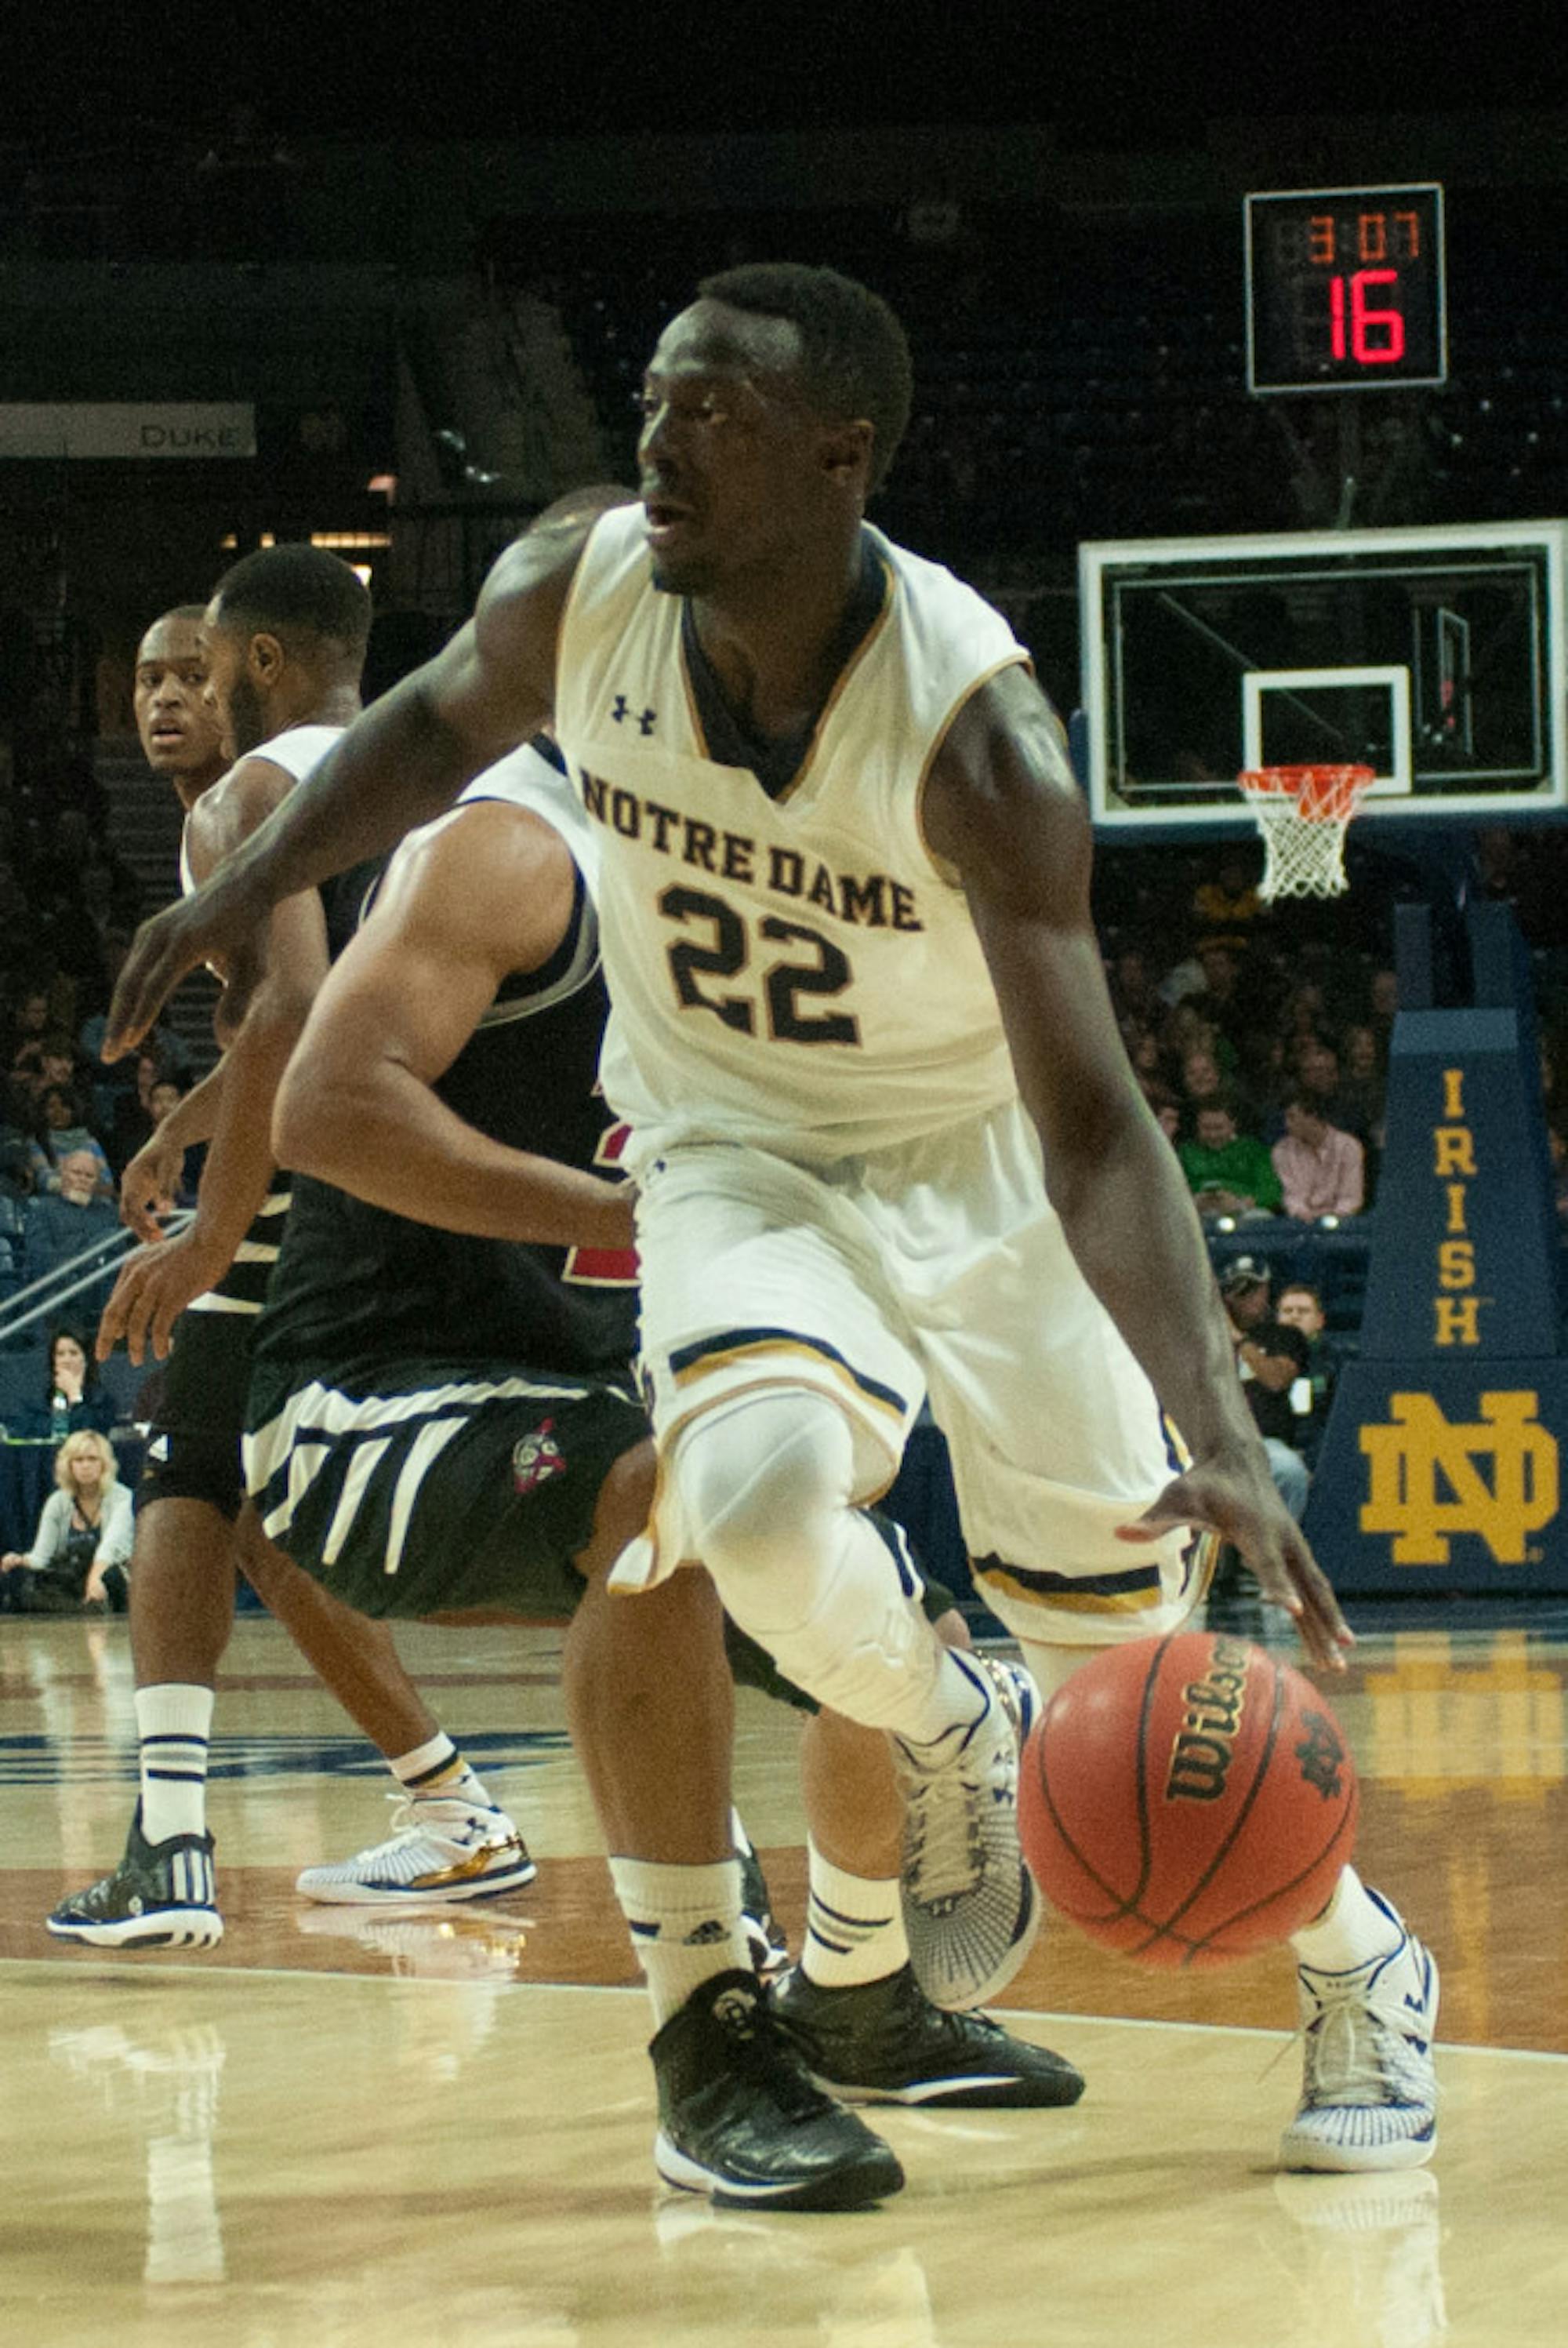 Irish senior guard Jerian Grant dribbles towards the basket during Notre Dame’s 82-59 exhibition win against Lewis on Friday.